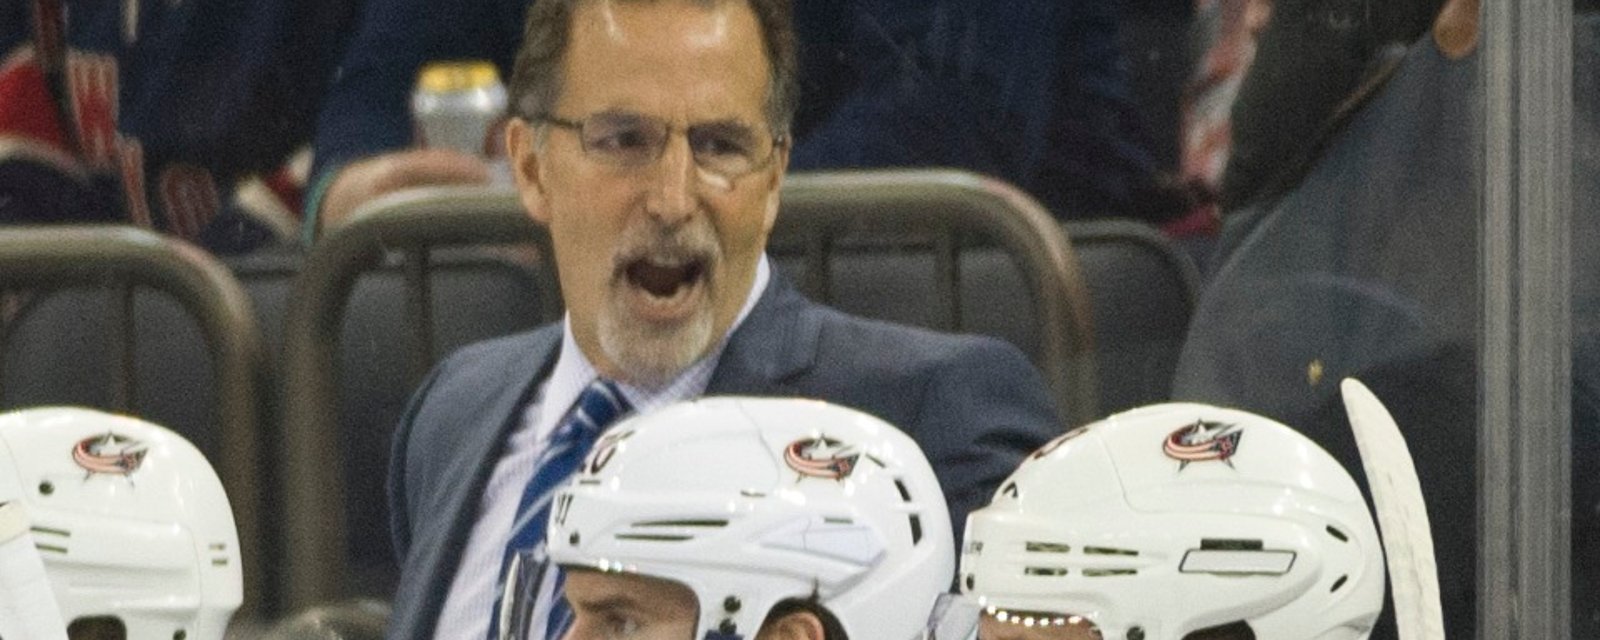 John Tortorella makes one of his players a healthy scratch &amp;amp; calls him out publicly!